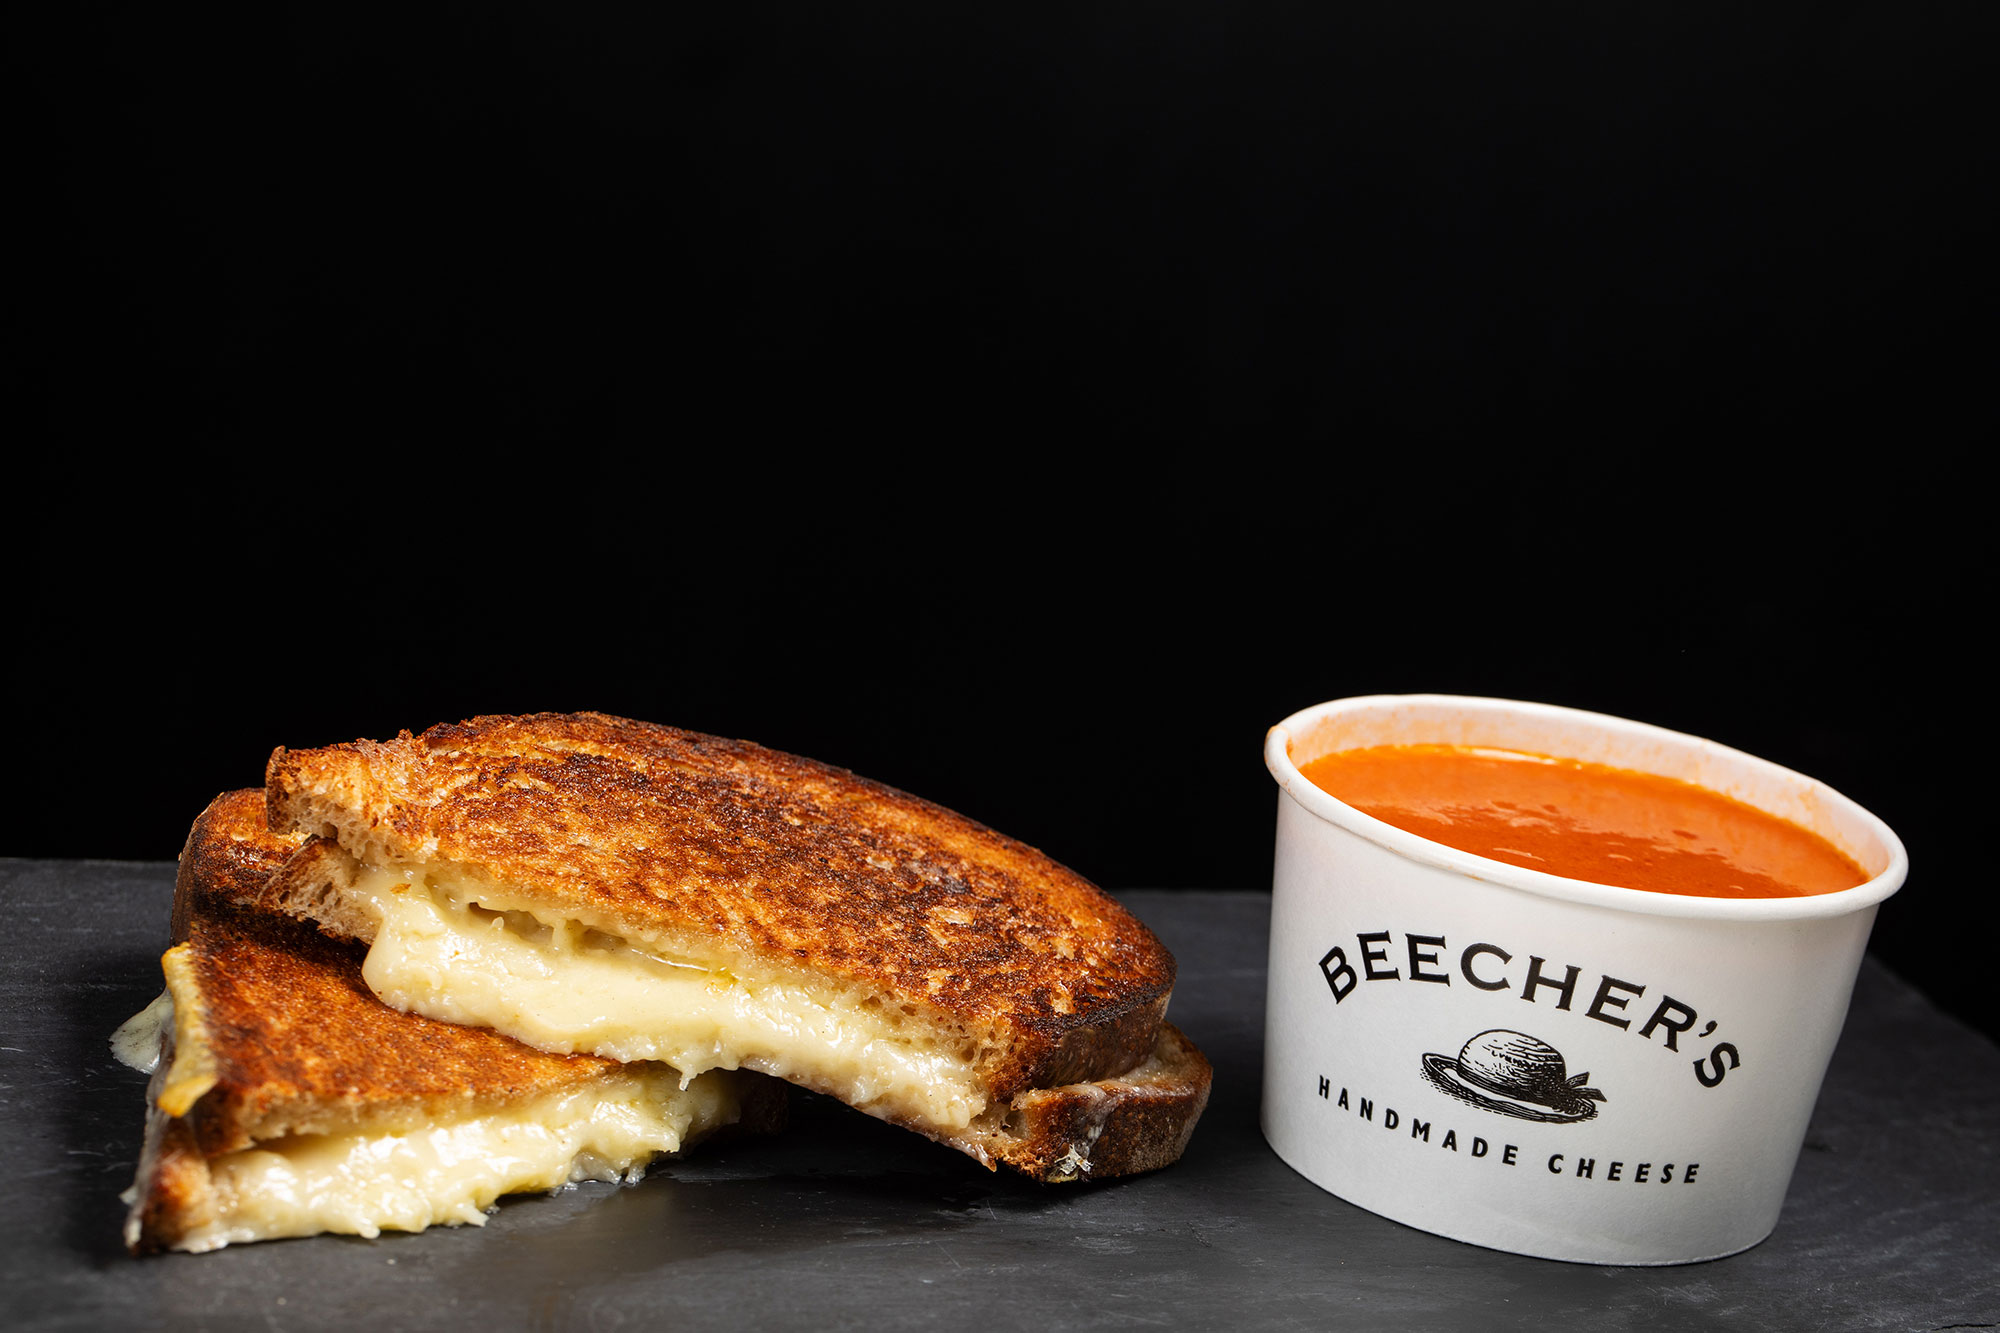 SEA Beecher's Handmade Cheese Plated Food (grilled cheese and tomato bisque)